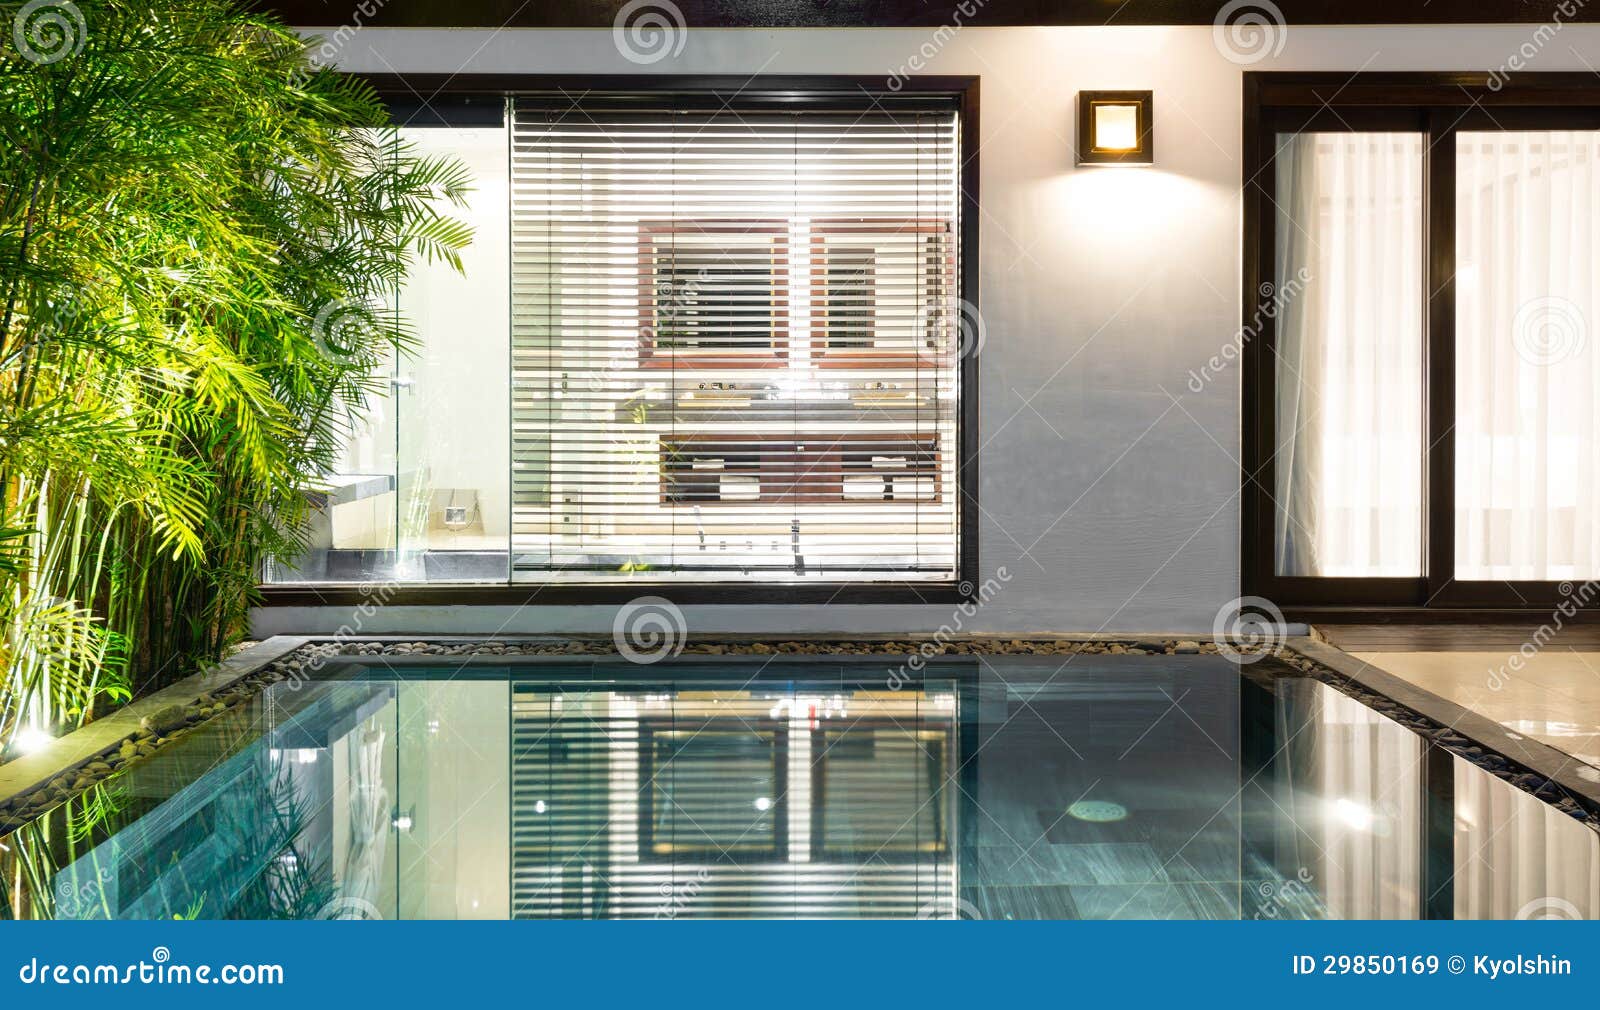 Luxury Hotel Room With Swimming Pool And Palms Stock Image